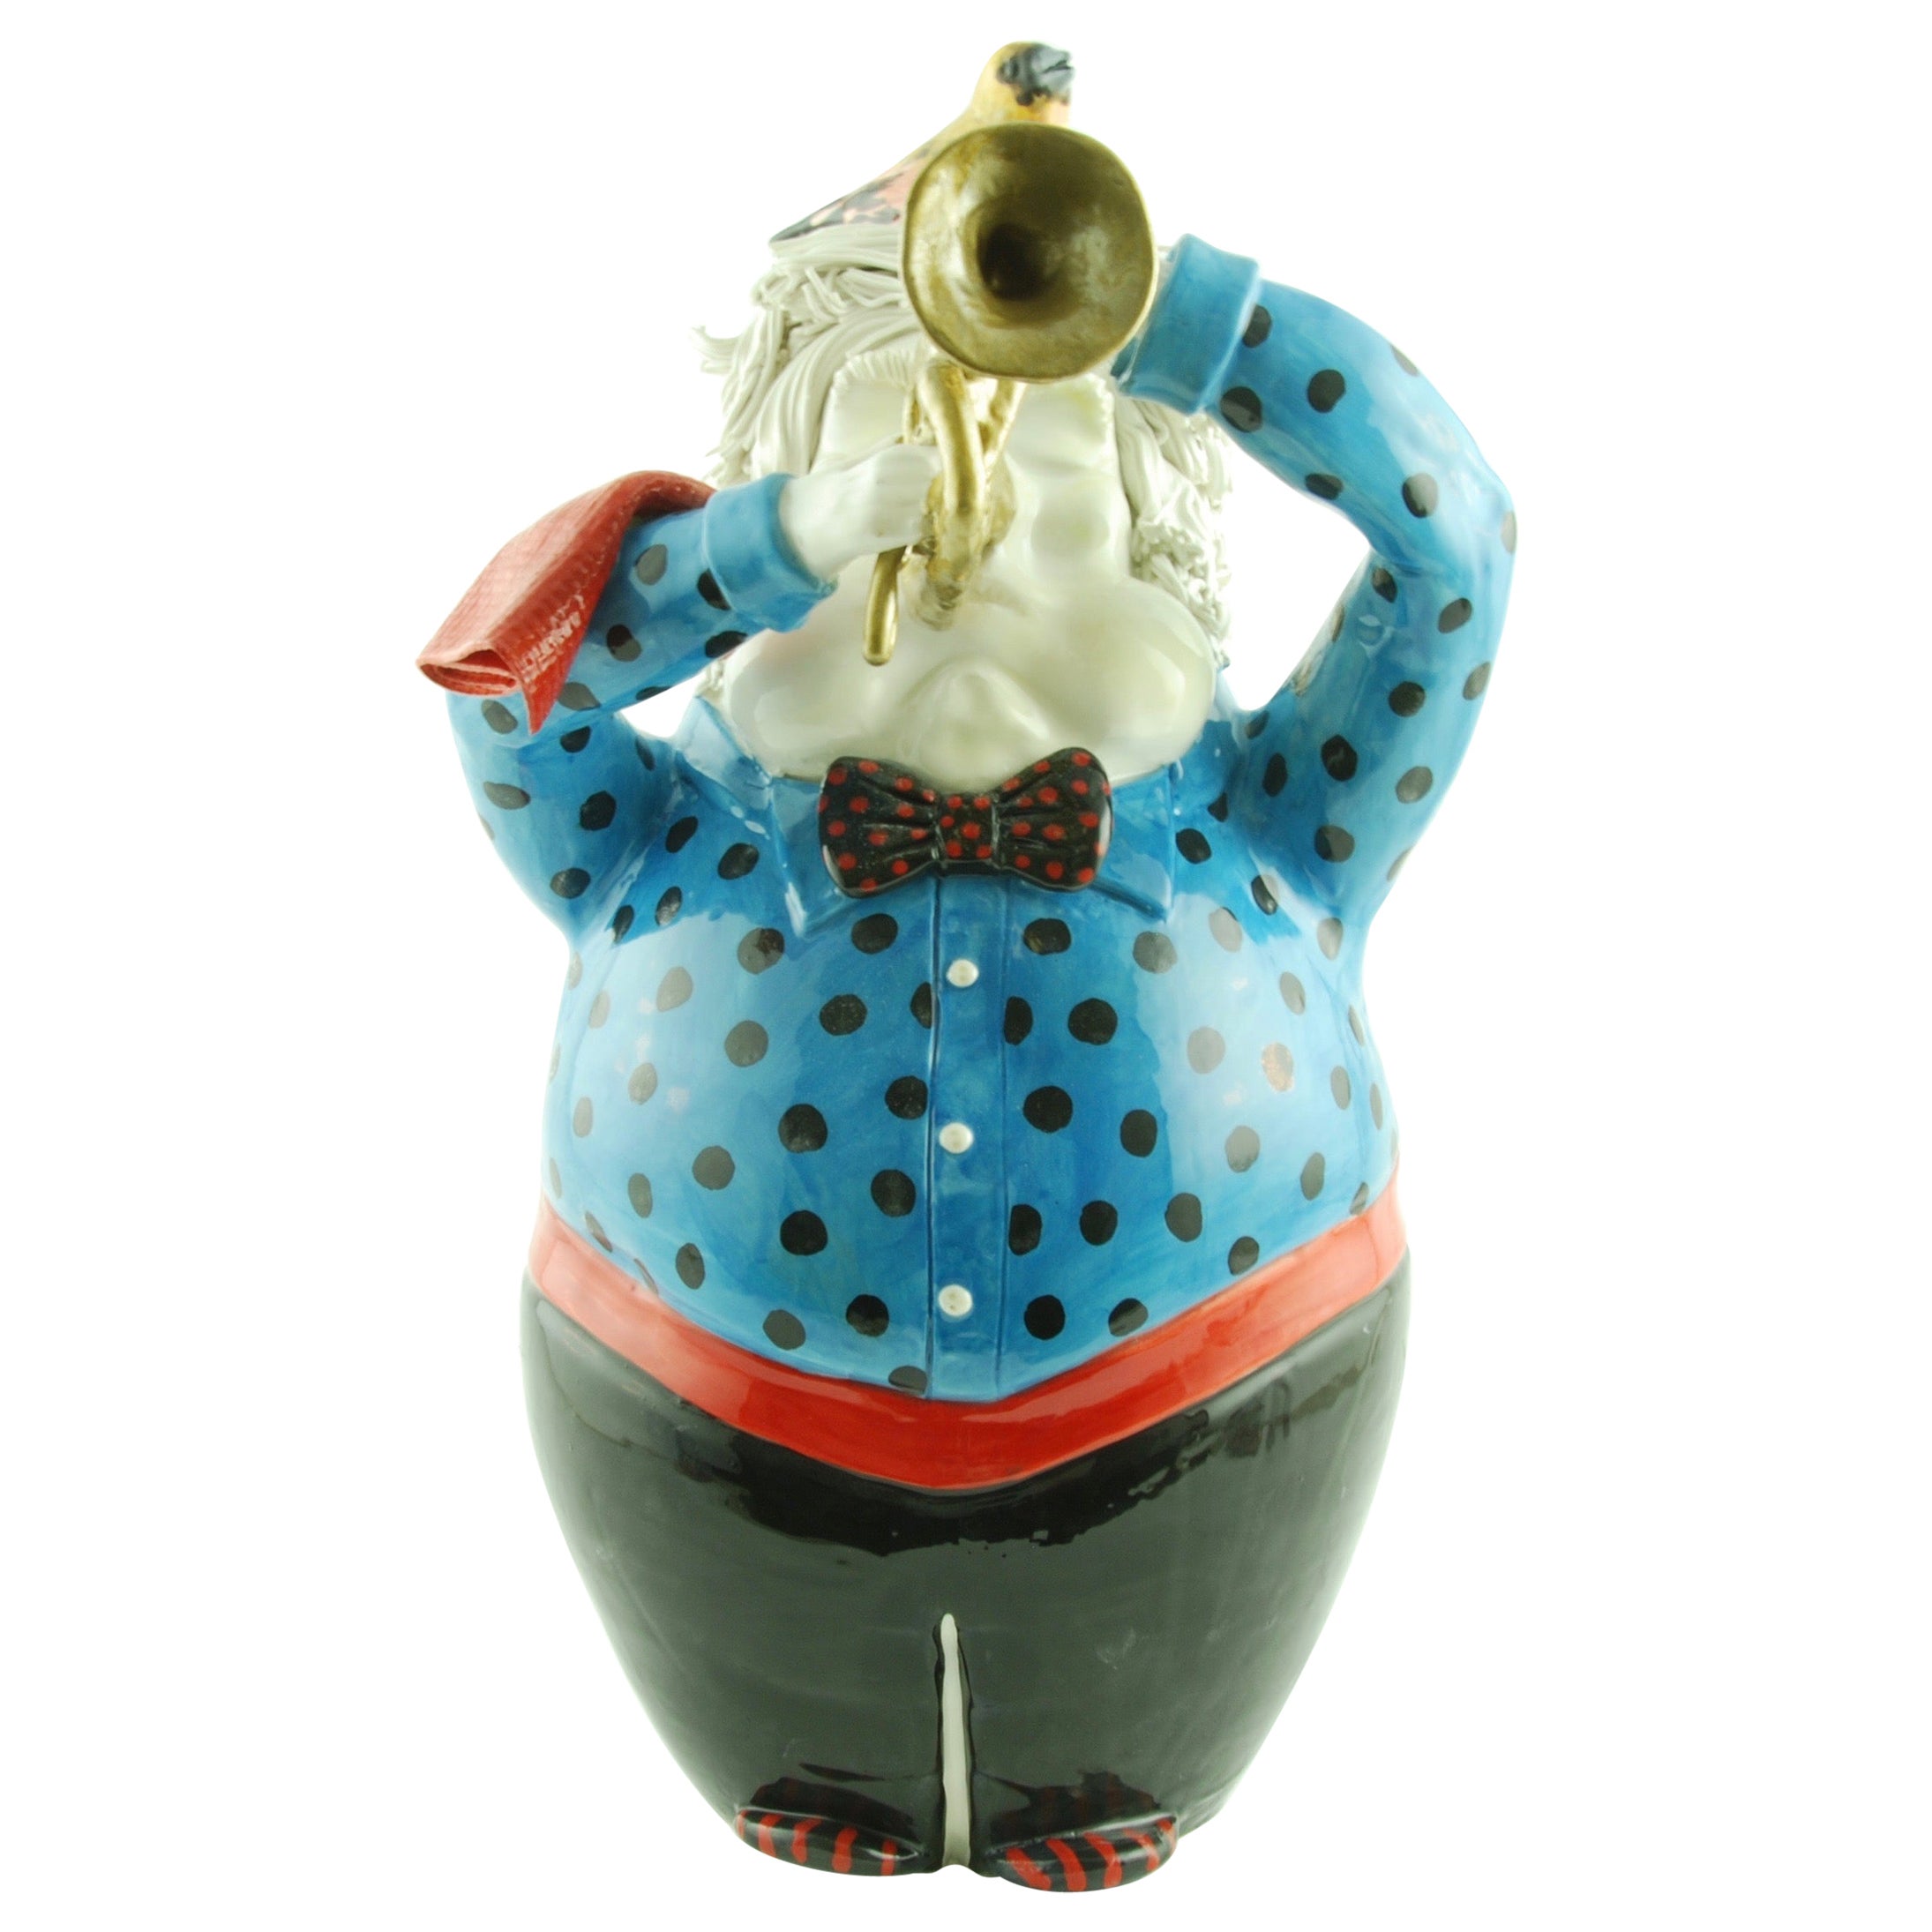 Musician Trumpet Decorative Ceramic Piece, Handmade Italy, 2021, Hand-Crafted For Sale